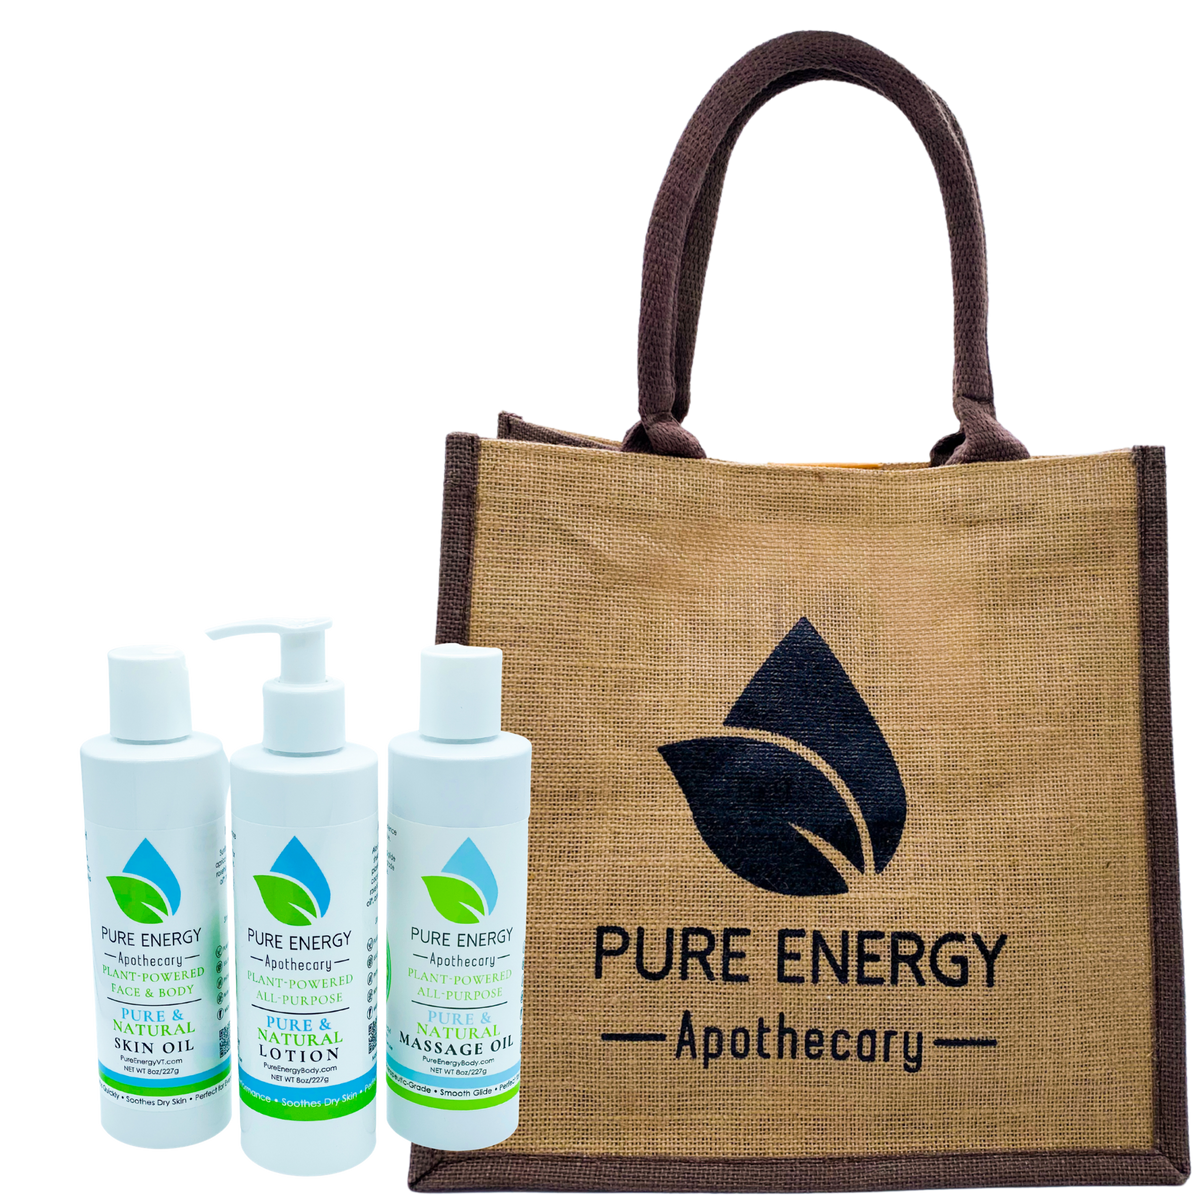 Moisture Madness (Pure & Natural) by Pure Energy Apothecary